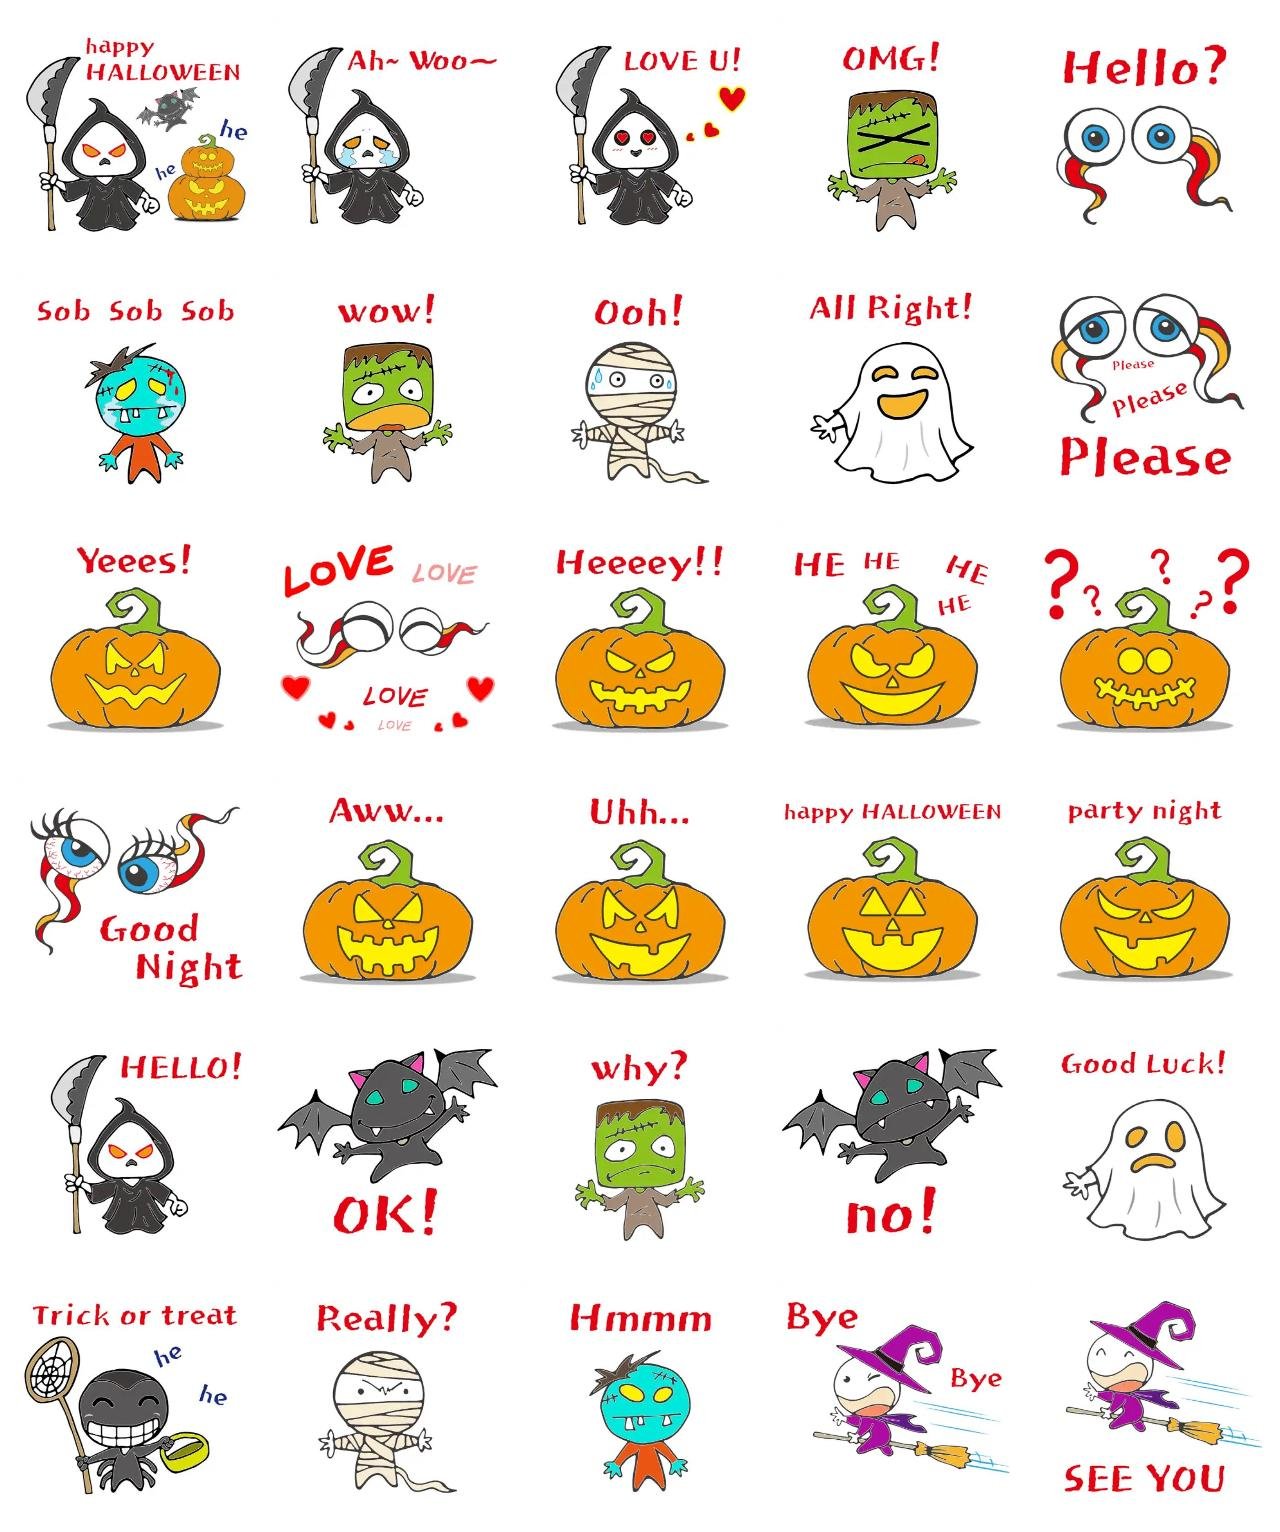 Halloween Day Etc.,Halloween sticker pack for Whatsapp, Telegram, Signal, and others chatting and message apps